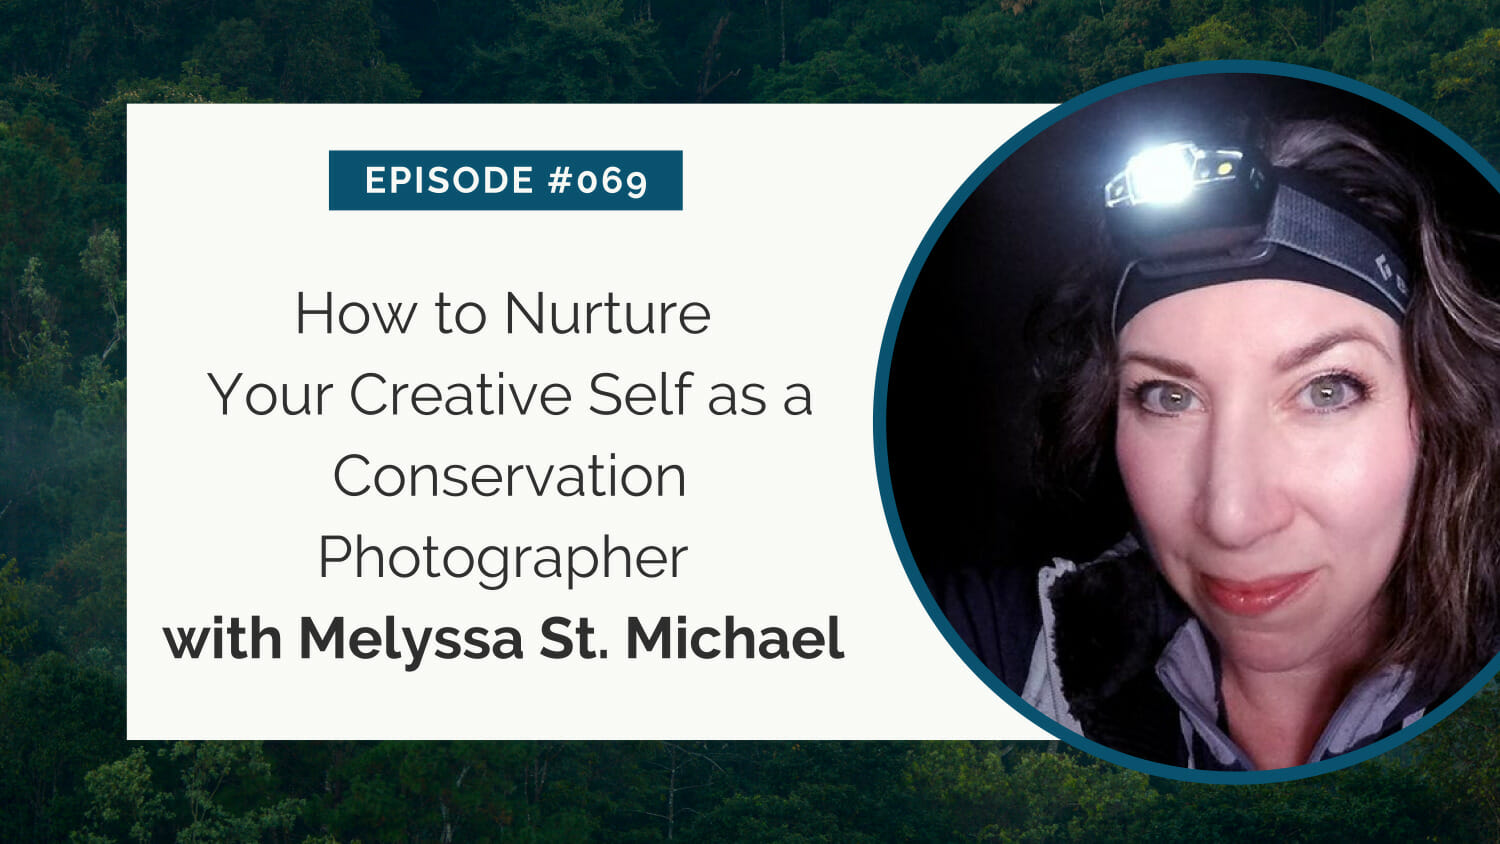 Podcast episode graphic featuring speaker melyssa st. michael discussing nurturing creativity in conservation photography.